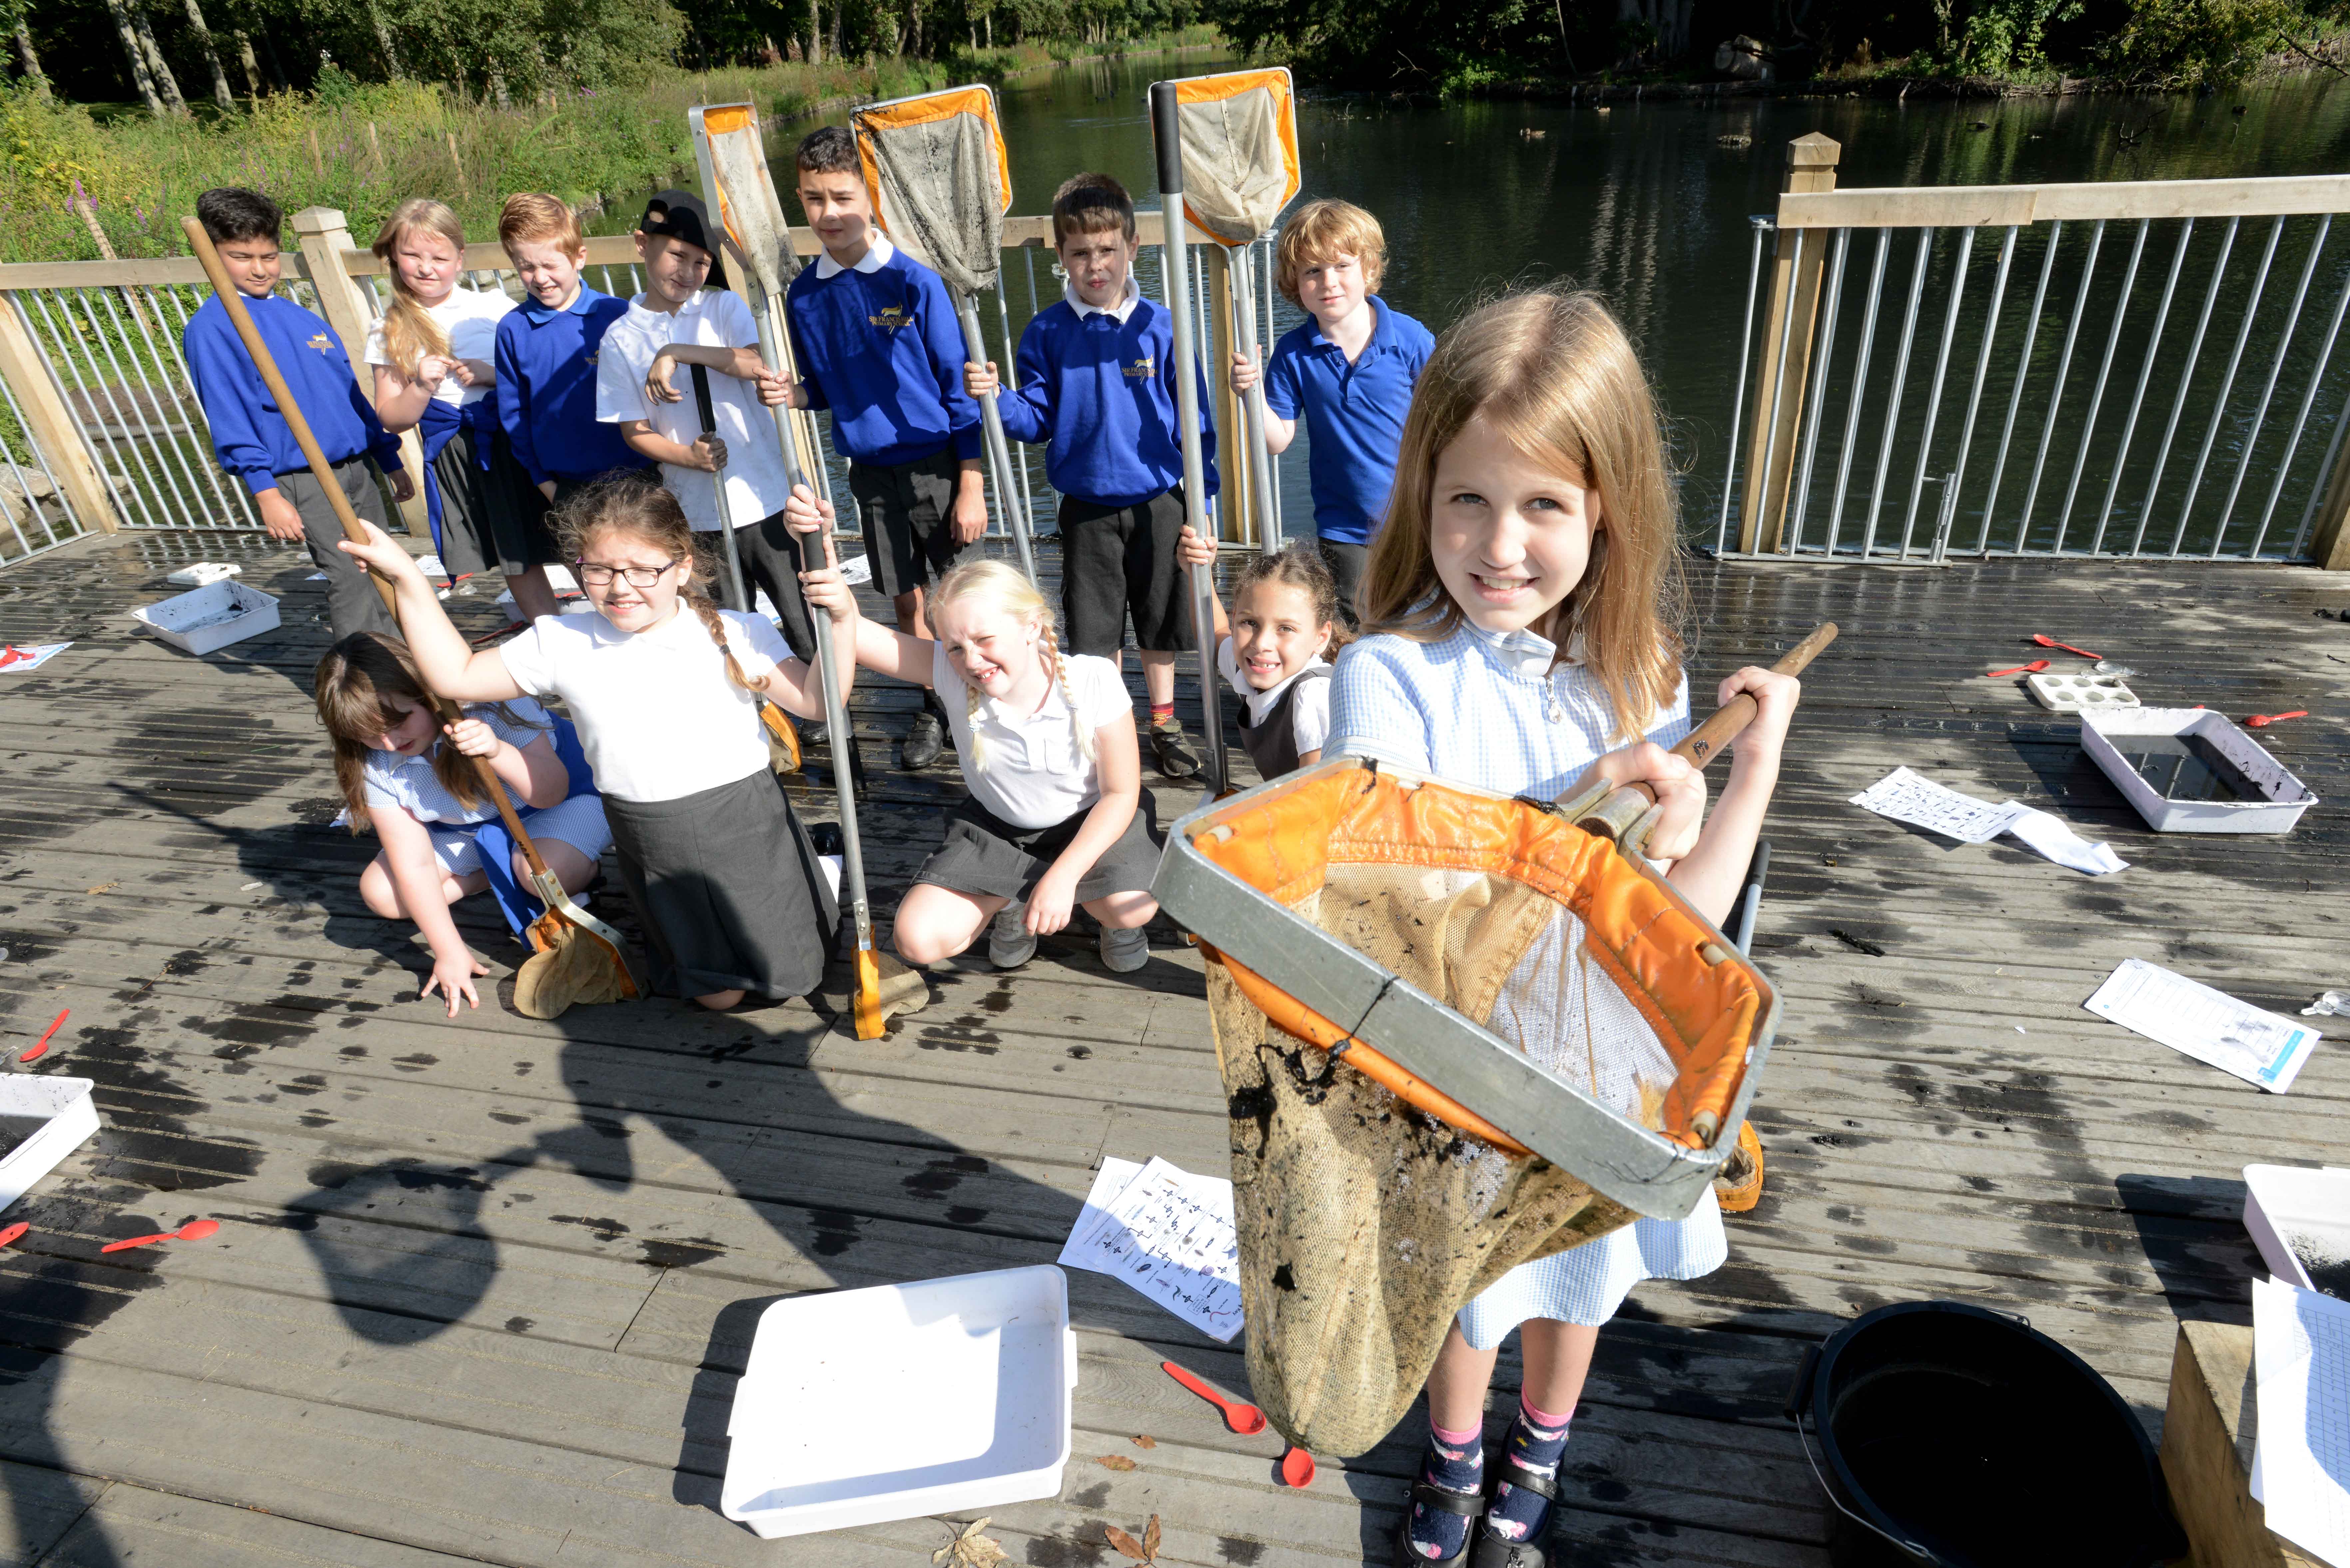 School children from Sir Francis Hill School pond dipping at Boultham Park Lake